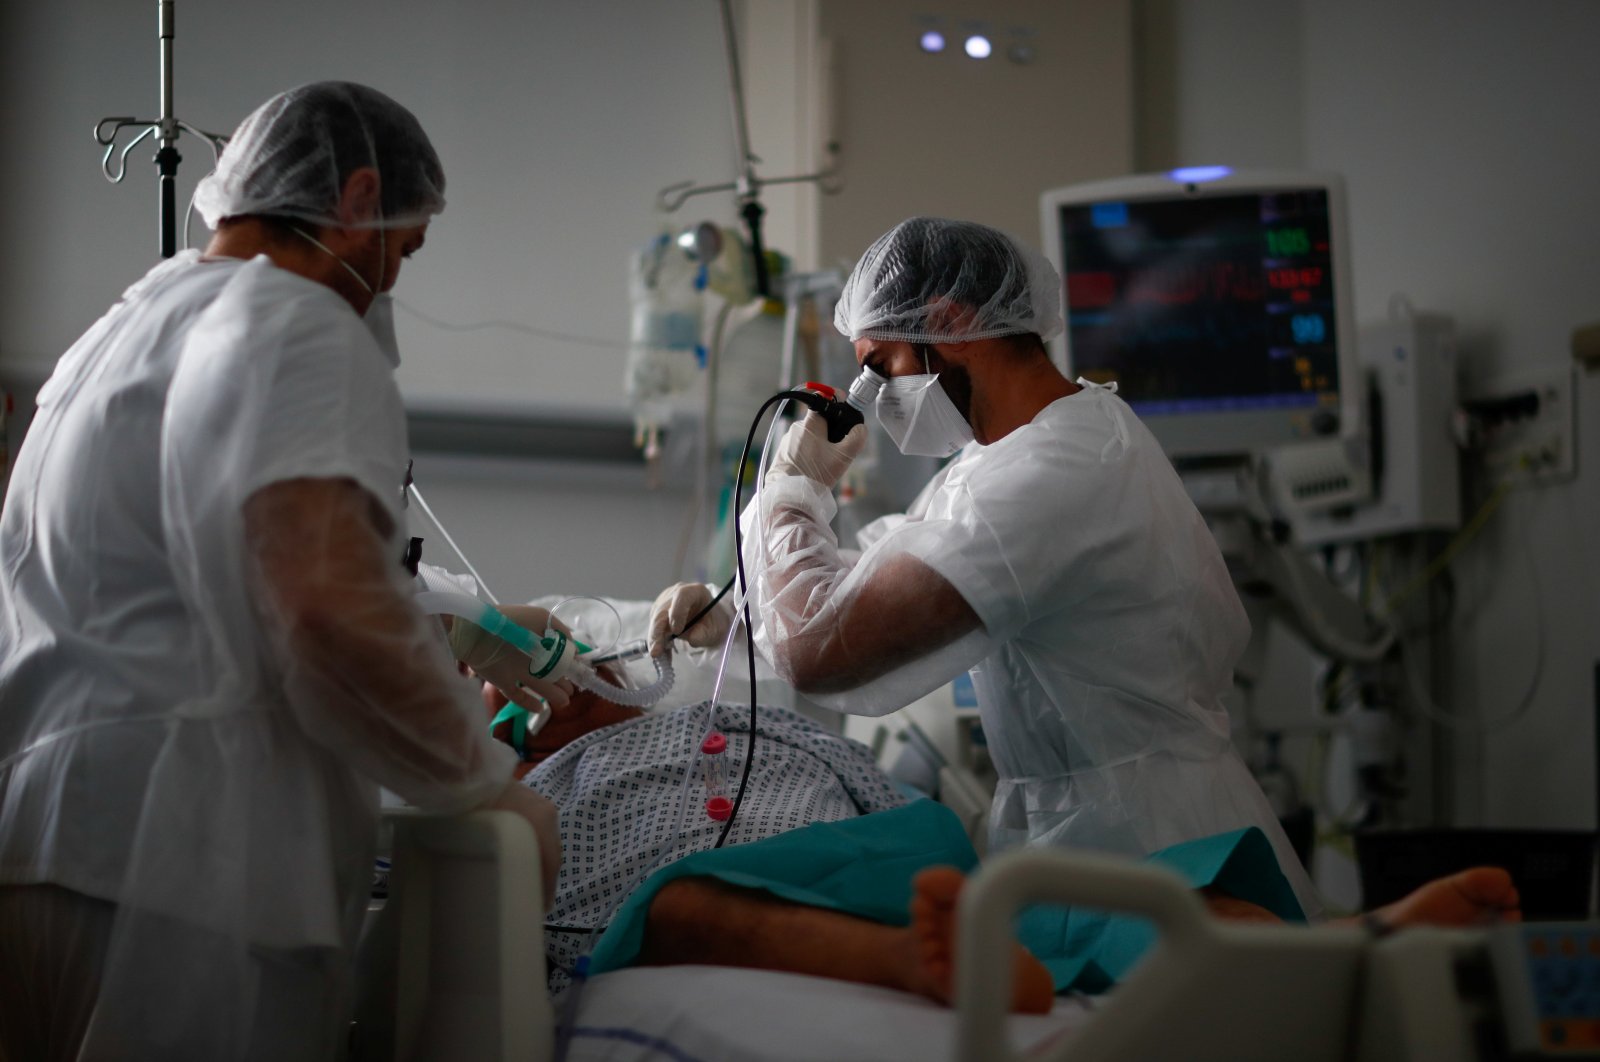 Doctors treat a patient suffering from COVID-19 in the intensive care unit (ICU) at the Robert Ballanger hospital in Aulnay-sous-Bois near Paris during the outbreak of the coronavirus in France, Oct. 26, 2020. (Reuters Photo)